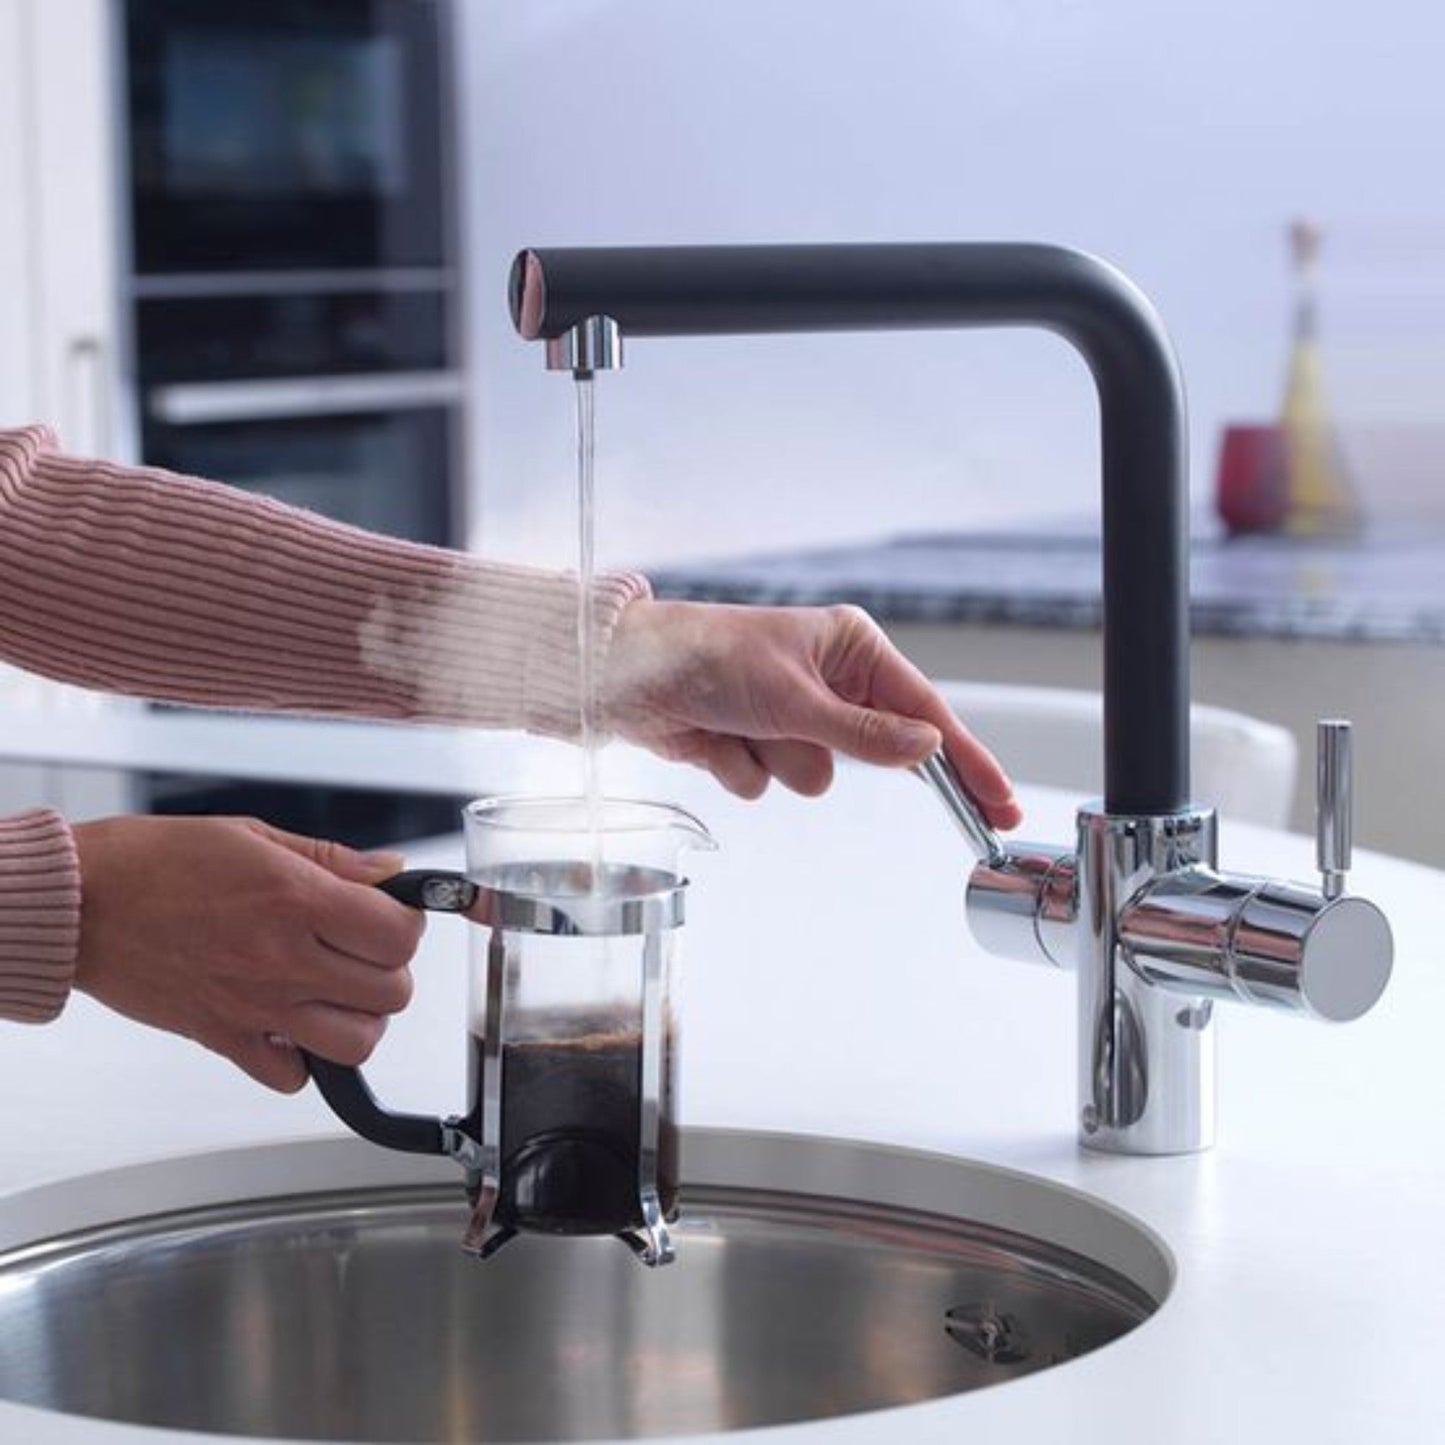 InSinkErator 3 in 1 Steaming Hot Water Kitchen Tap (Tap Only) Jet Black lifestyle image- The Tap Specialist